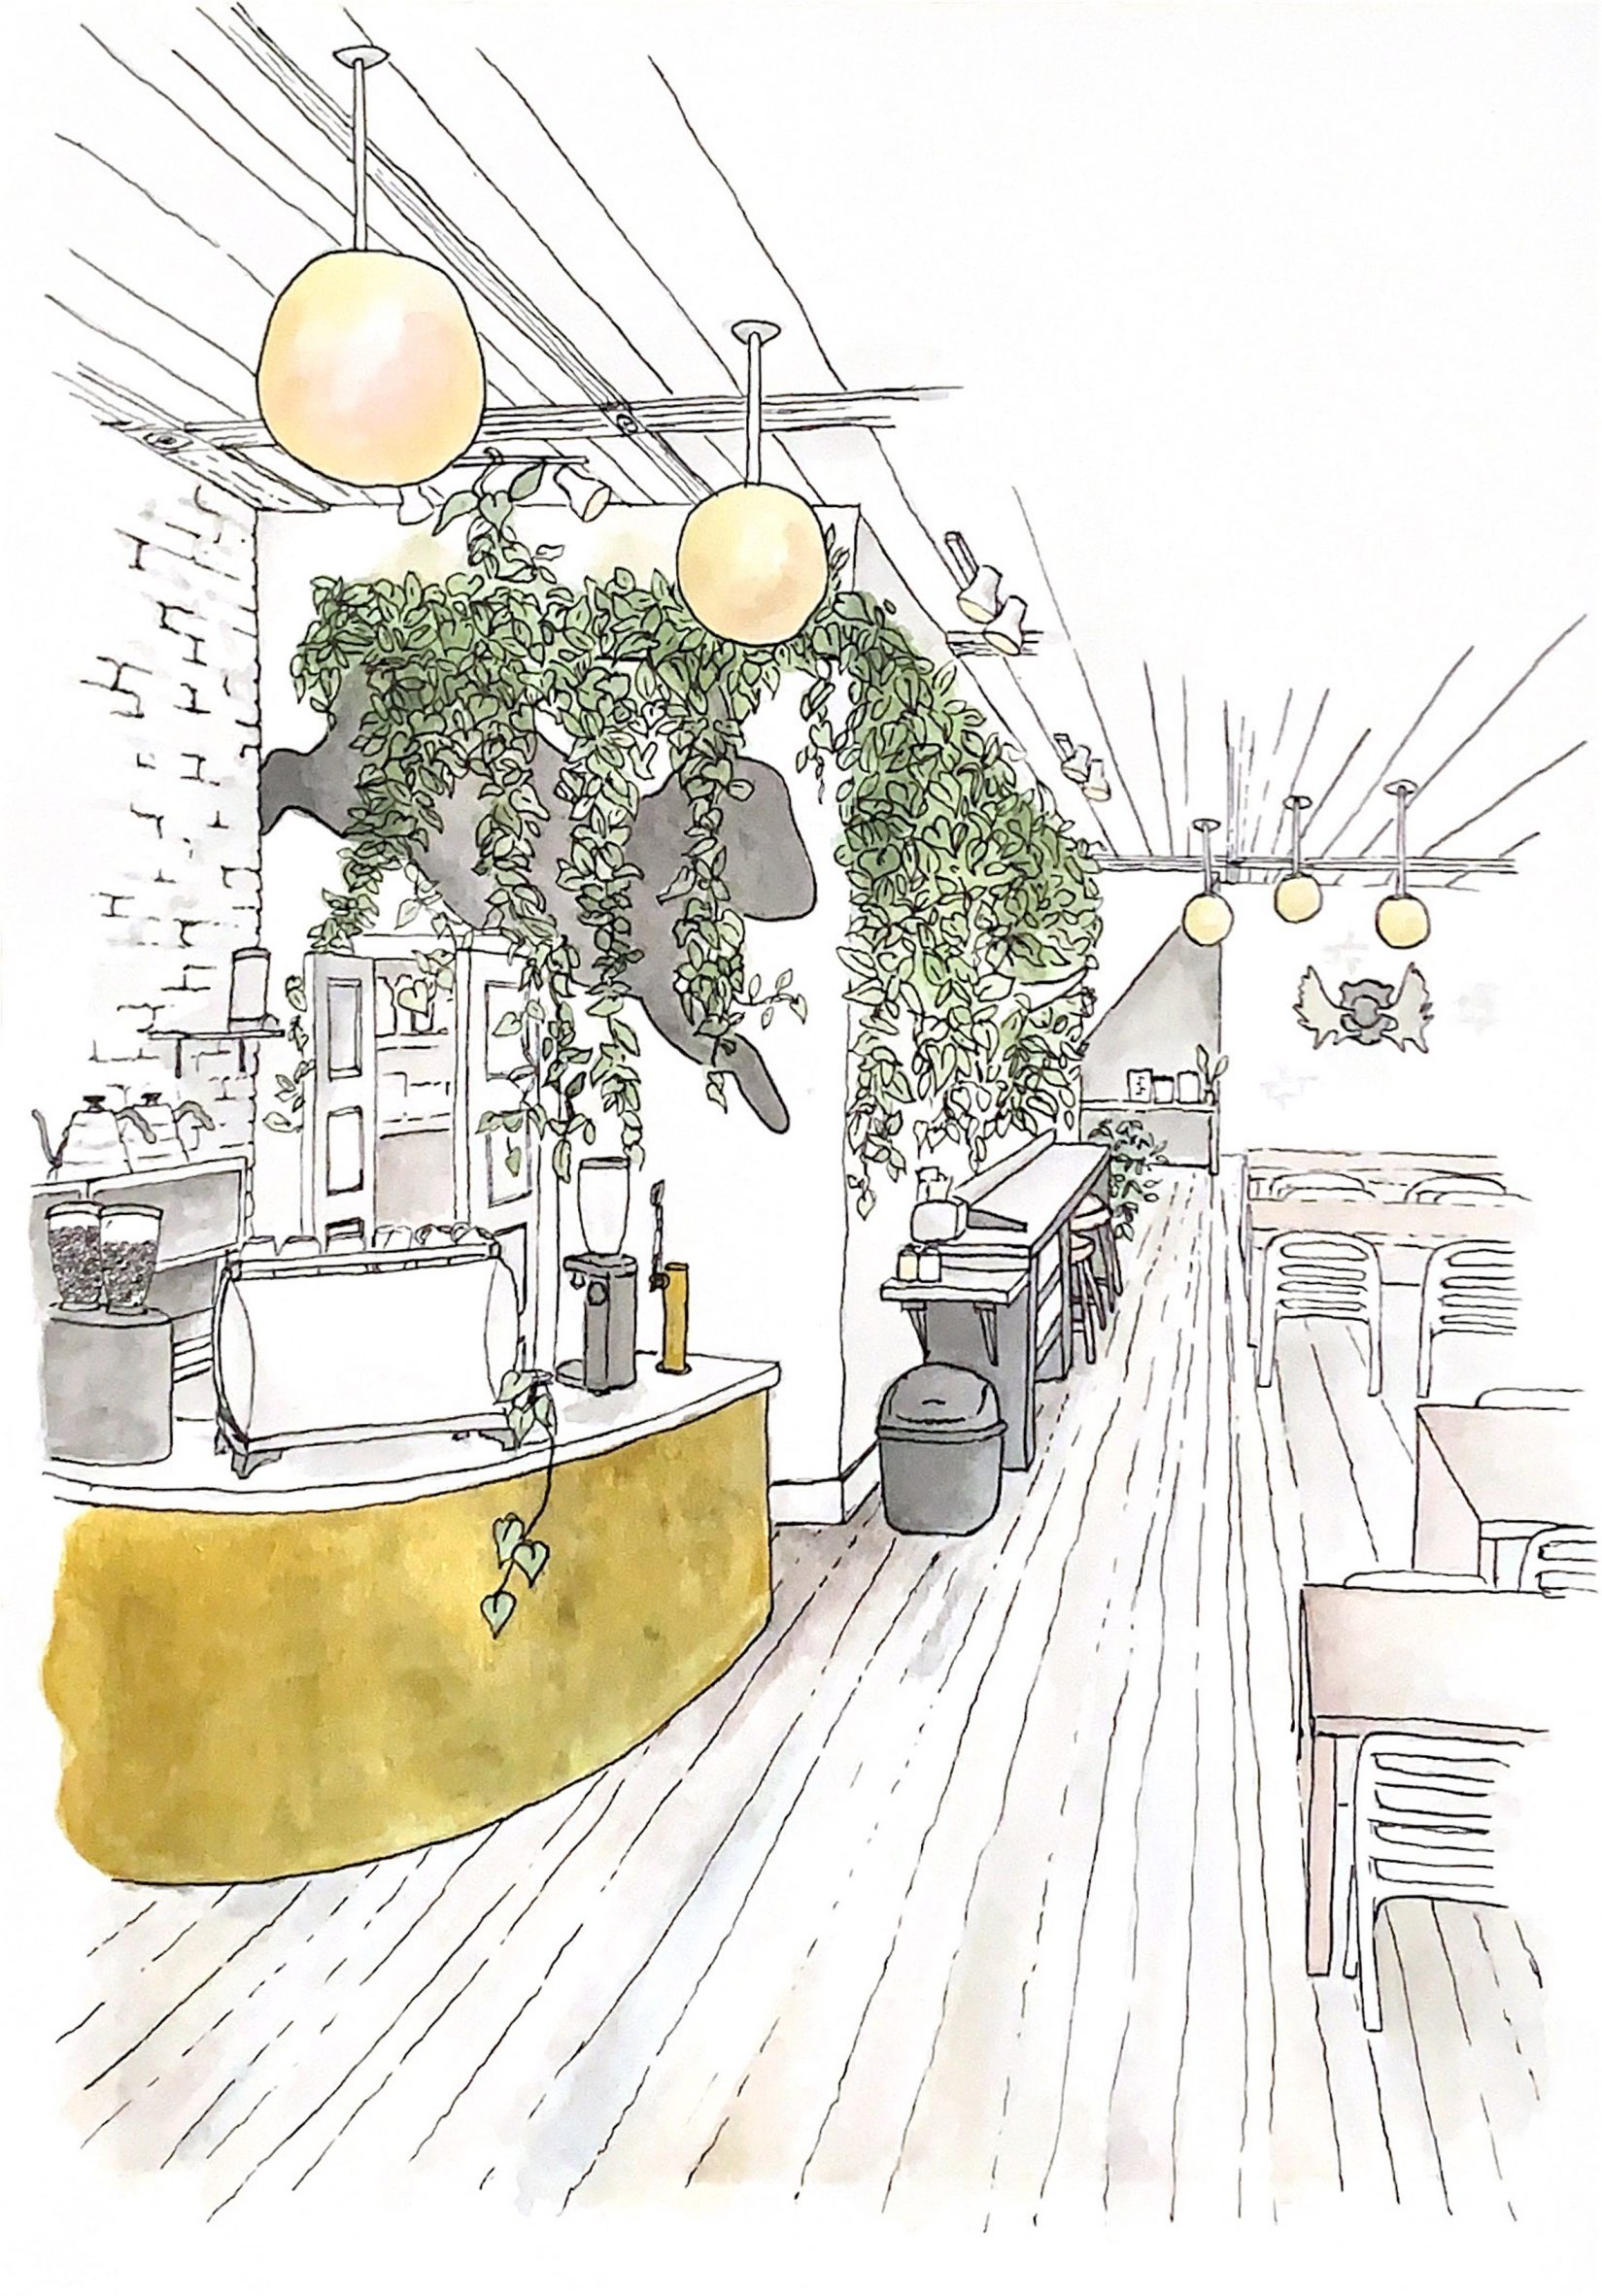 Illustration of a coffee shop with hanging plants